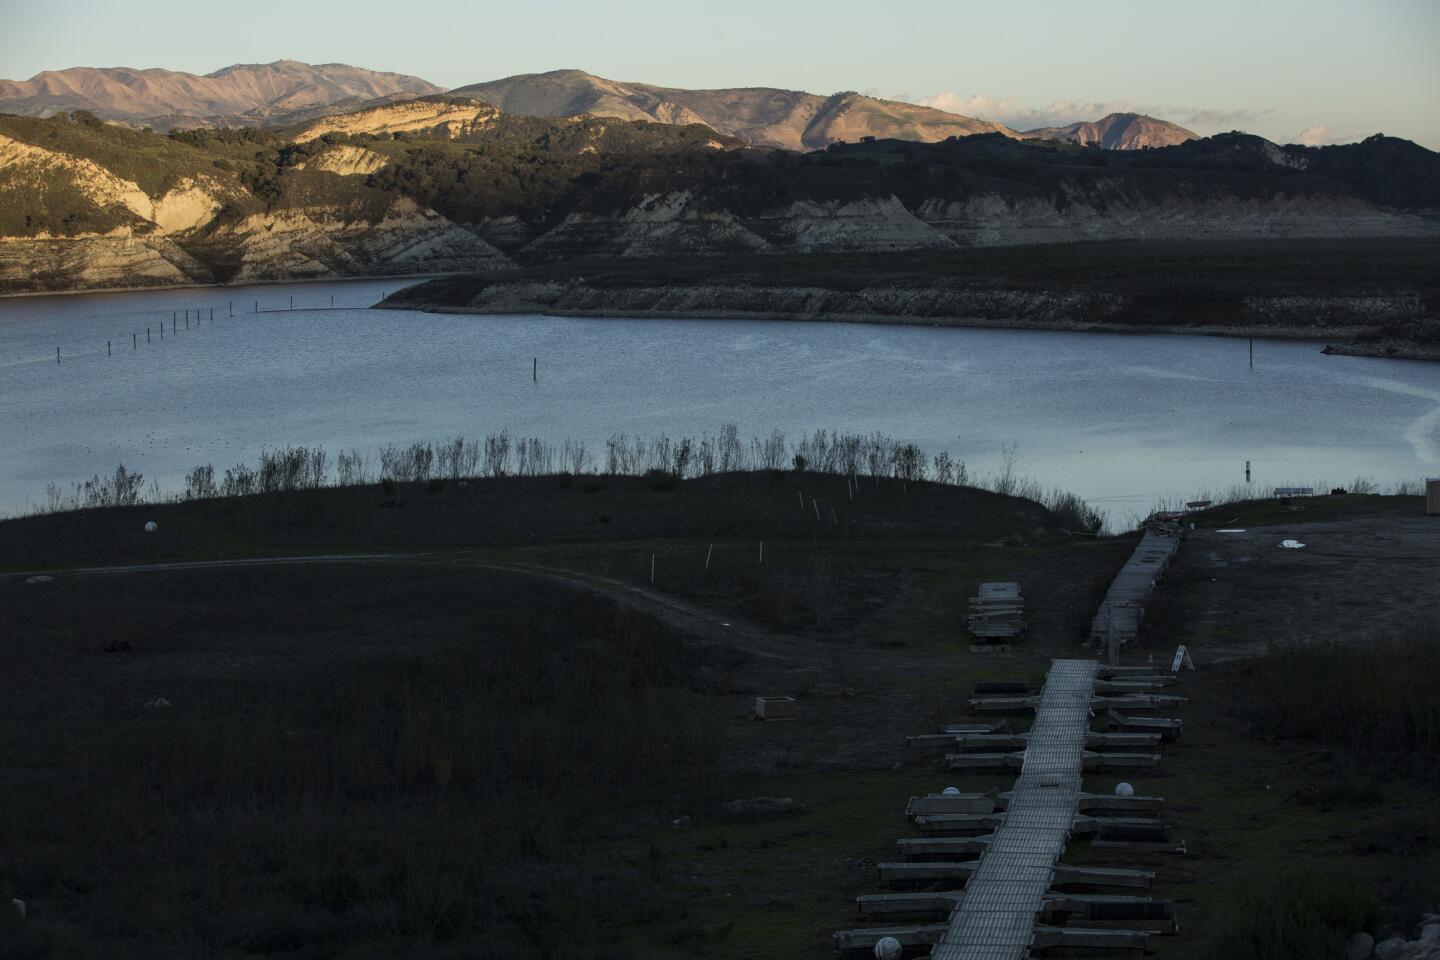 Lake Cachuma is currently at 13% of its historical average and 9% of its capacity, the lowest by far of any reservoir in California.